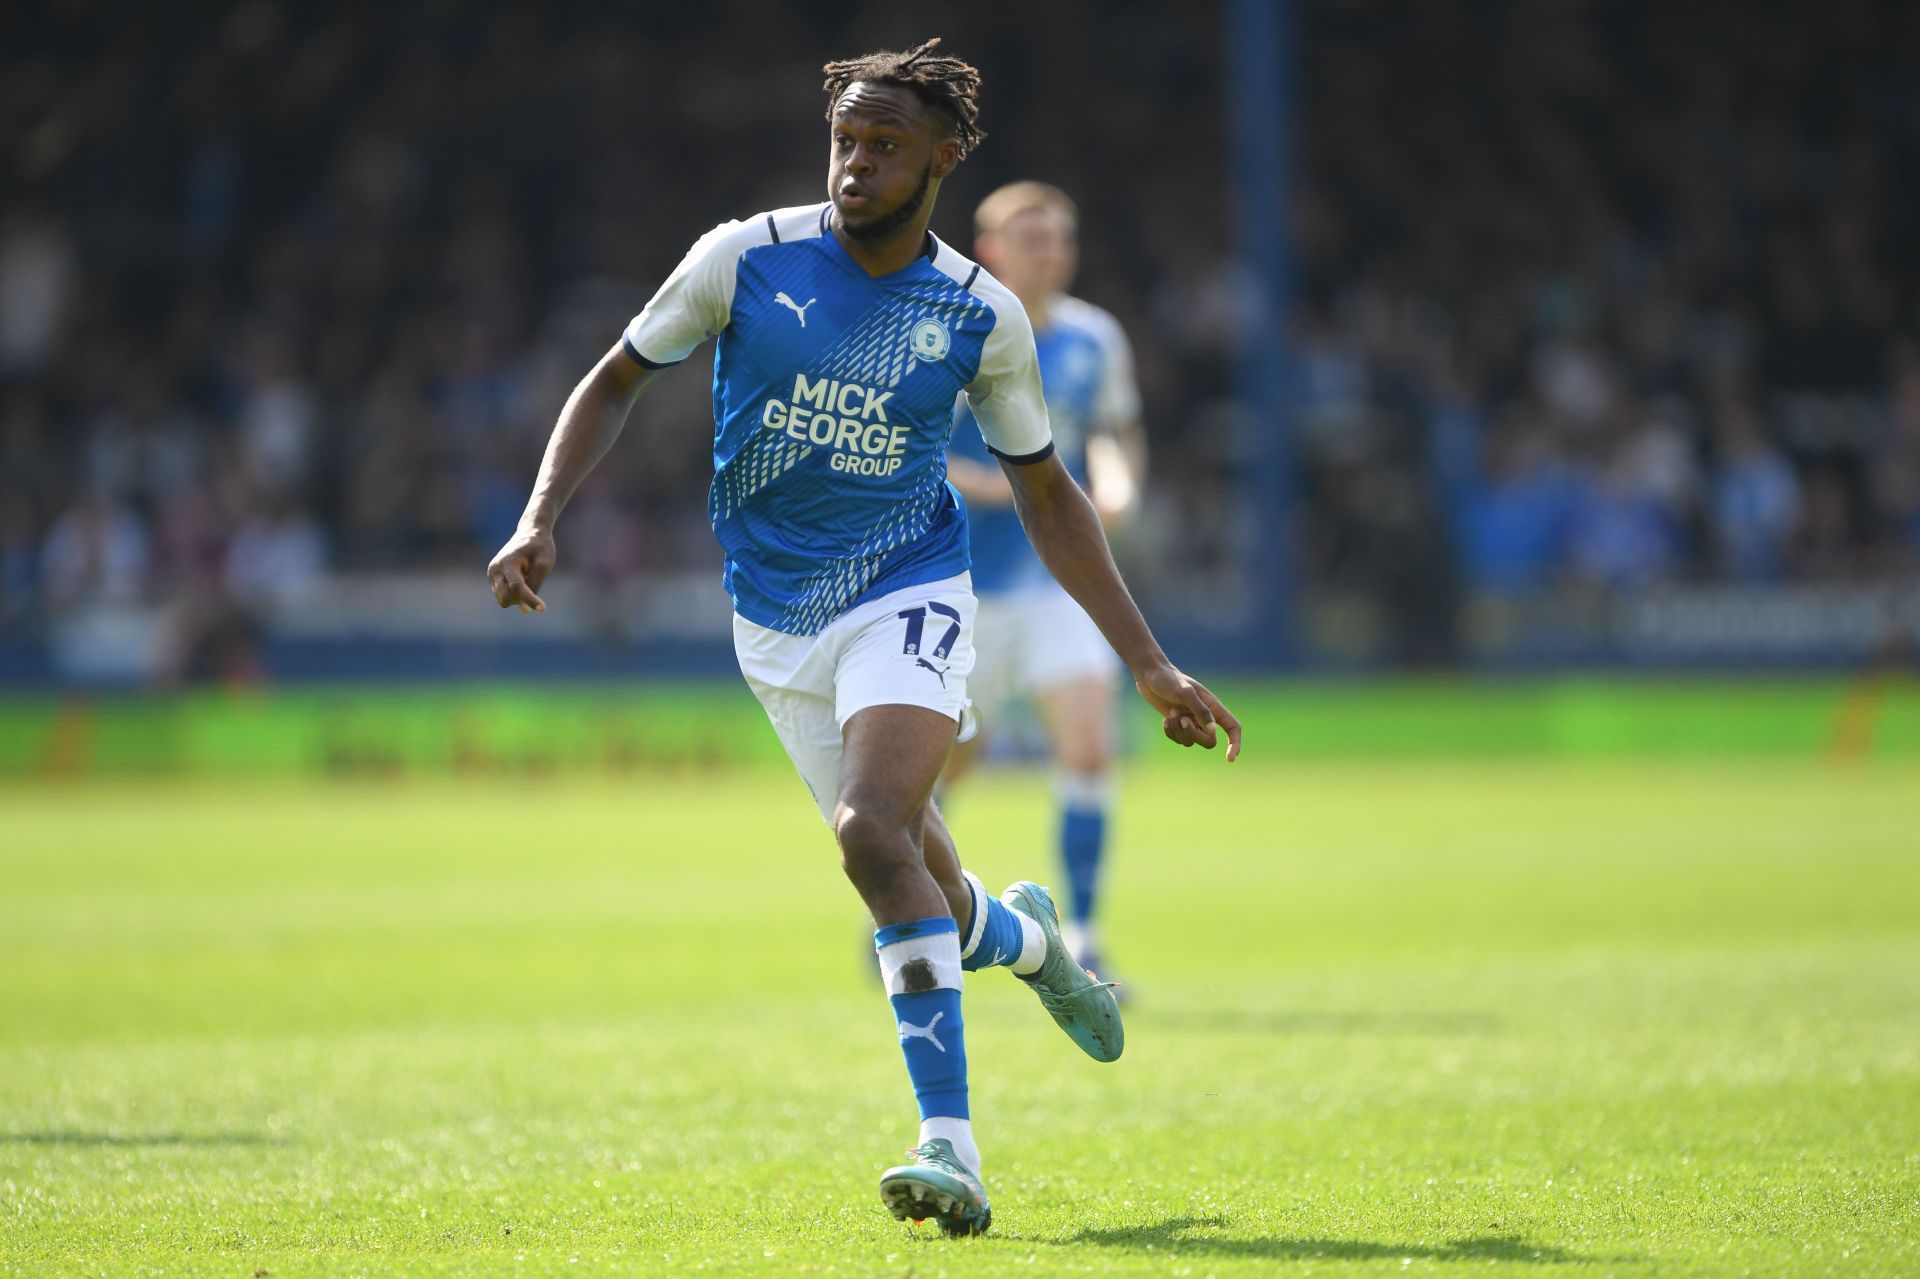 Peterborough United will host Nottingham Forest on Saturday - Sky Bet Championship